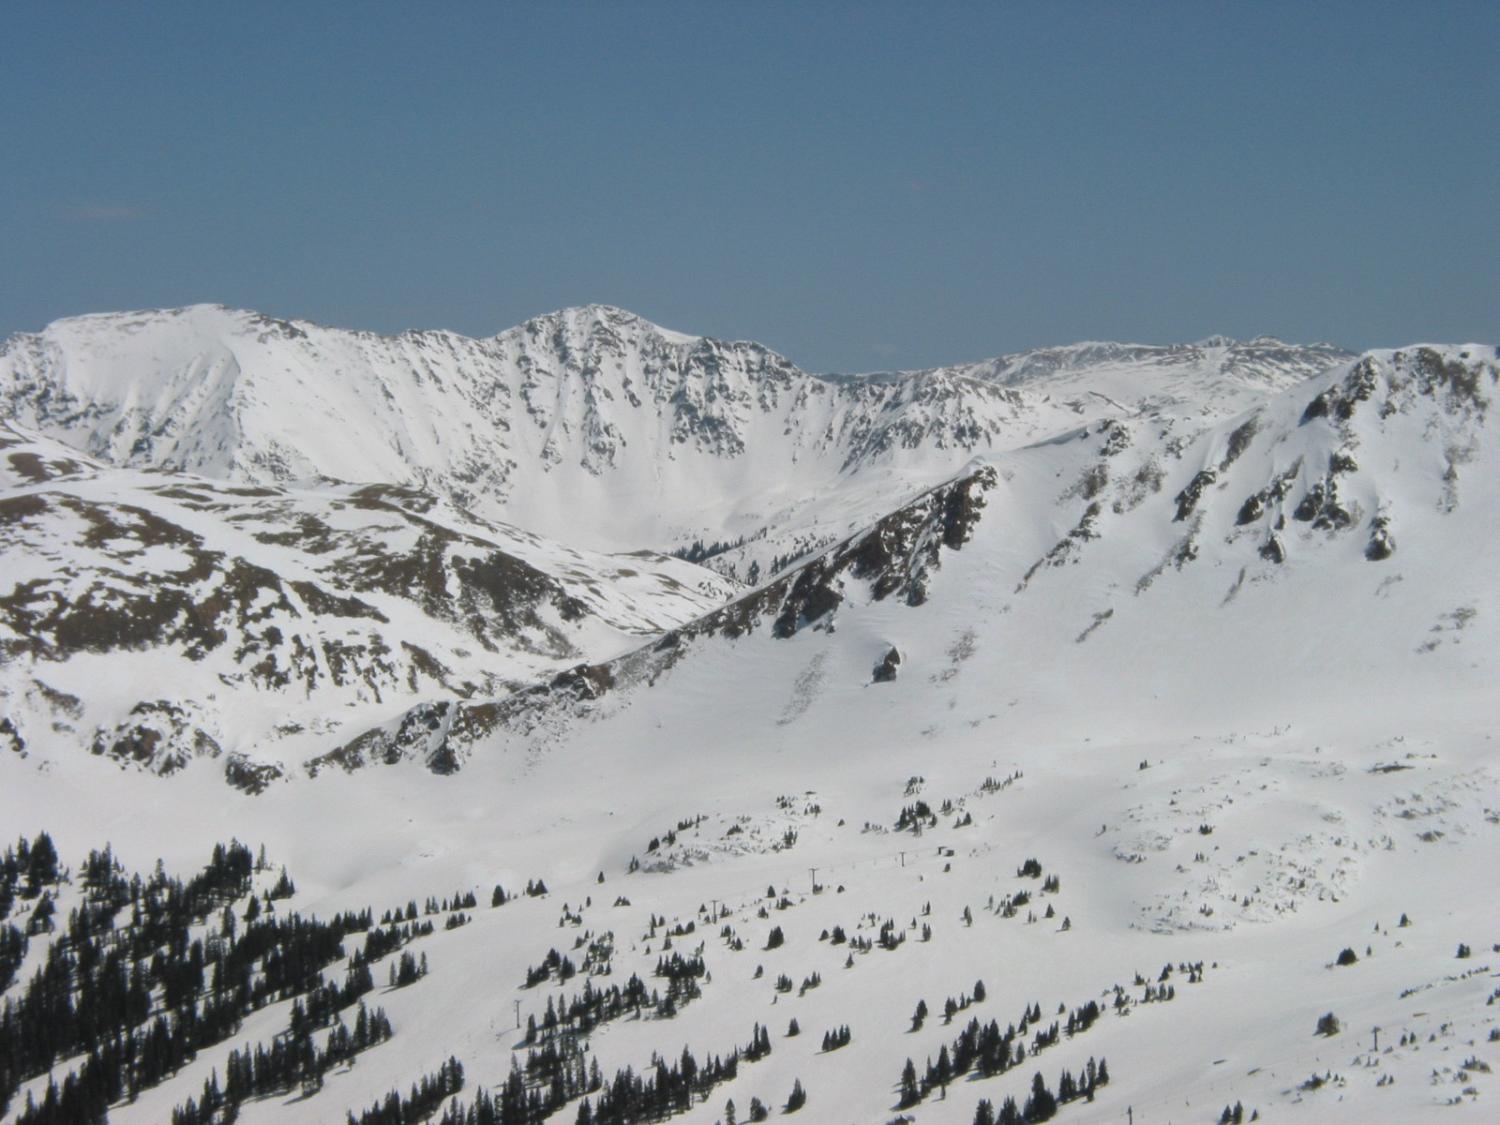 View of A-Basin from the top of Super Nova 